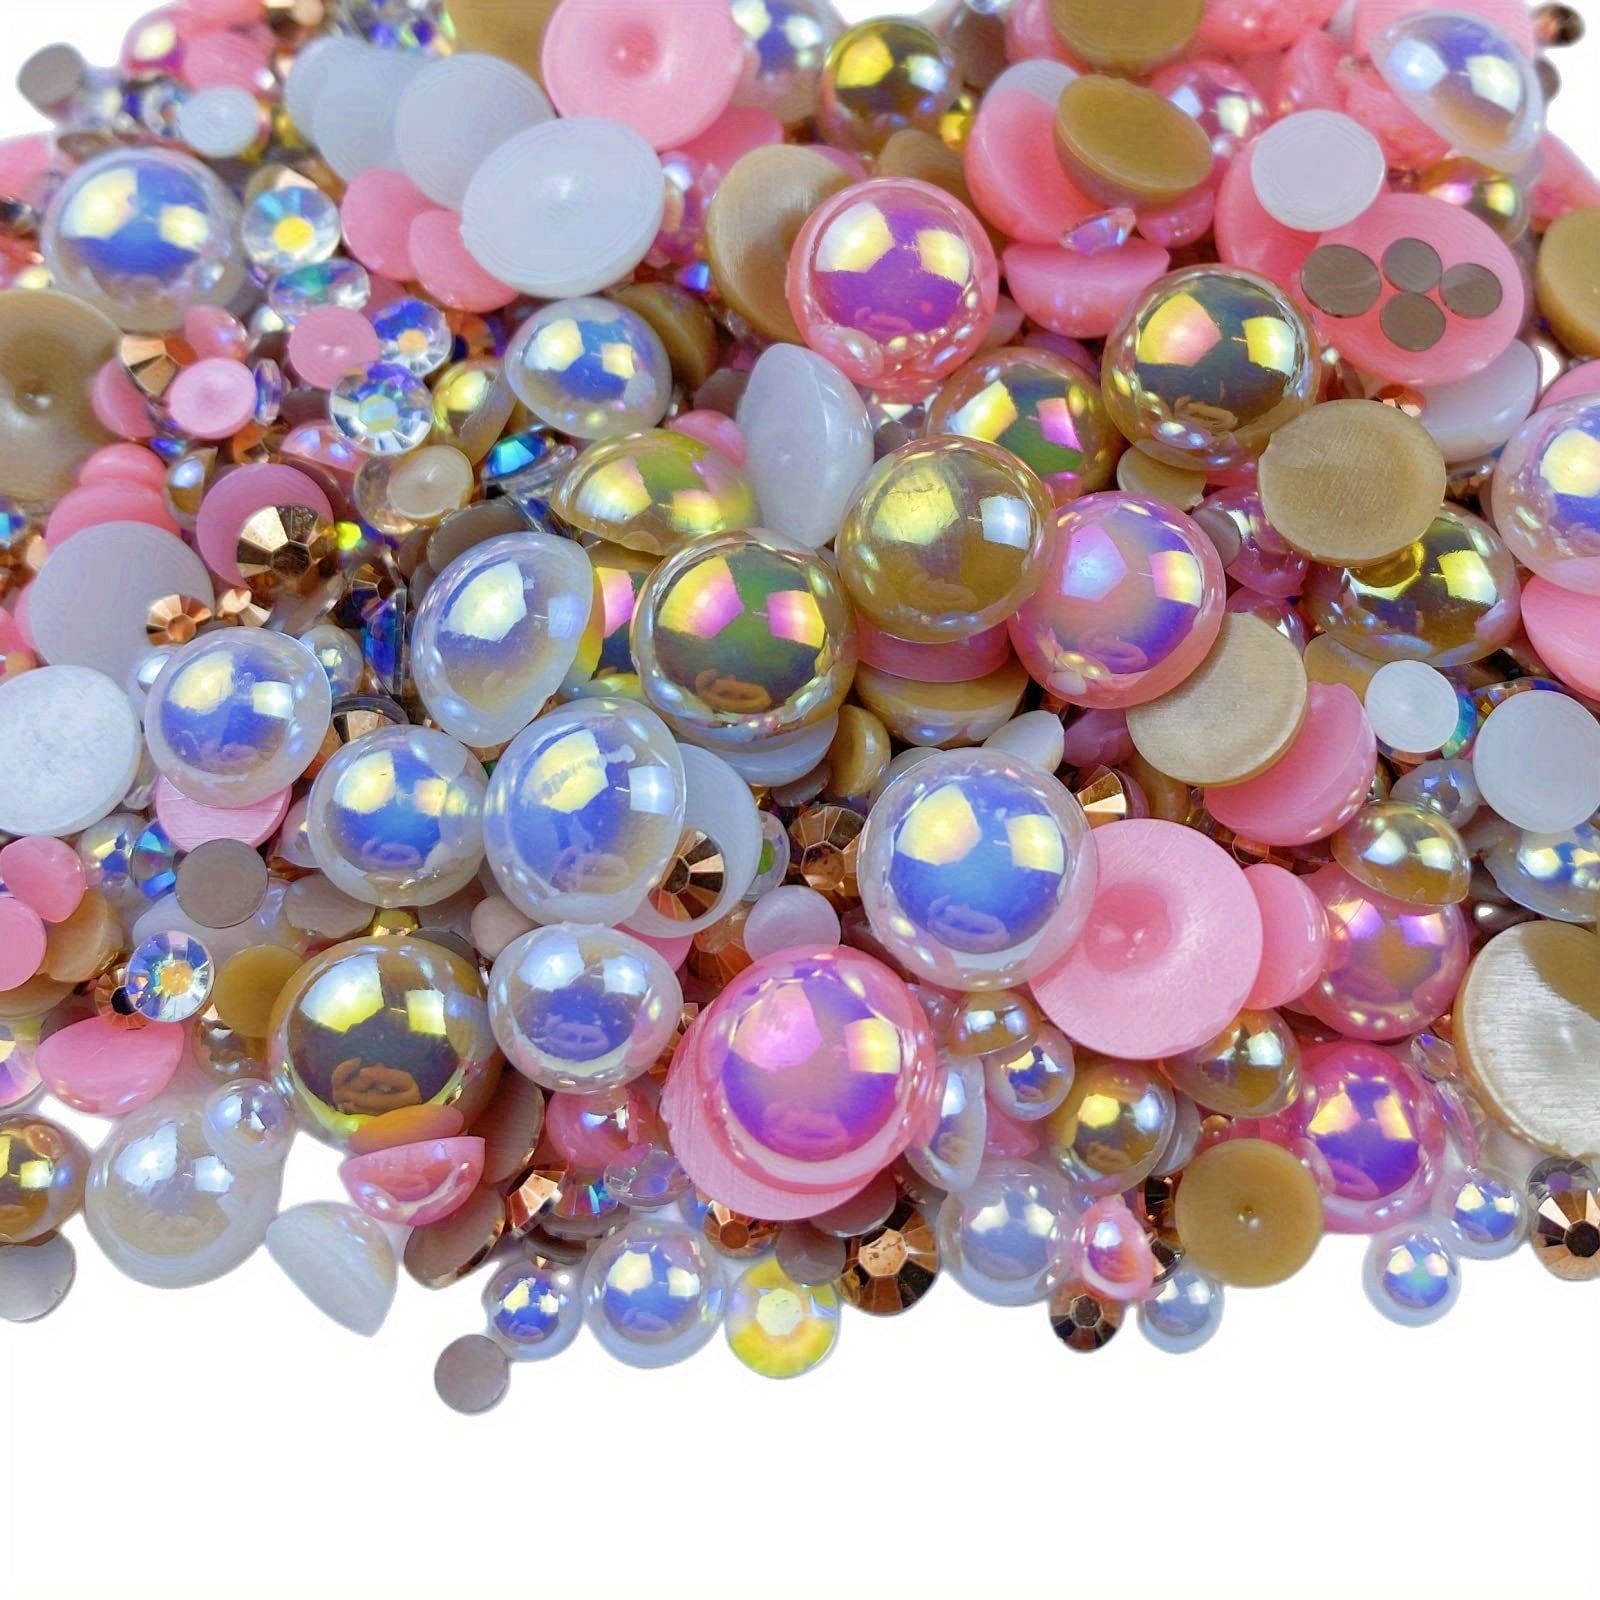 30g Half Pearl Rhinestones for Crafts Mixed Size Small, Pink Blue Series